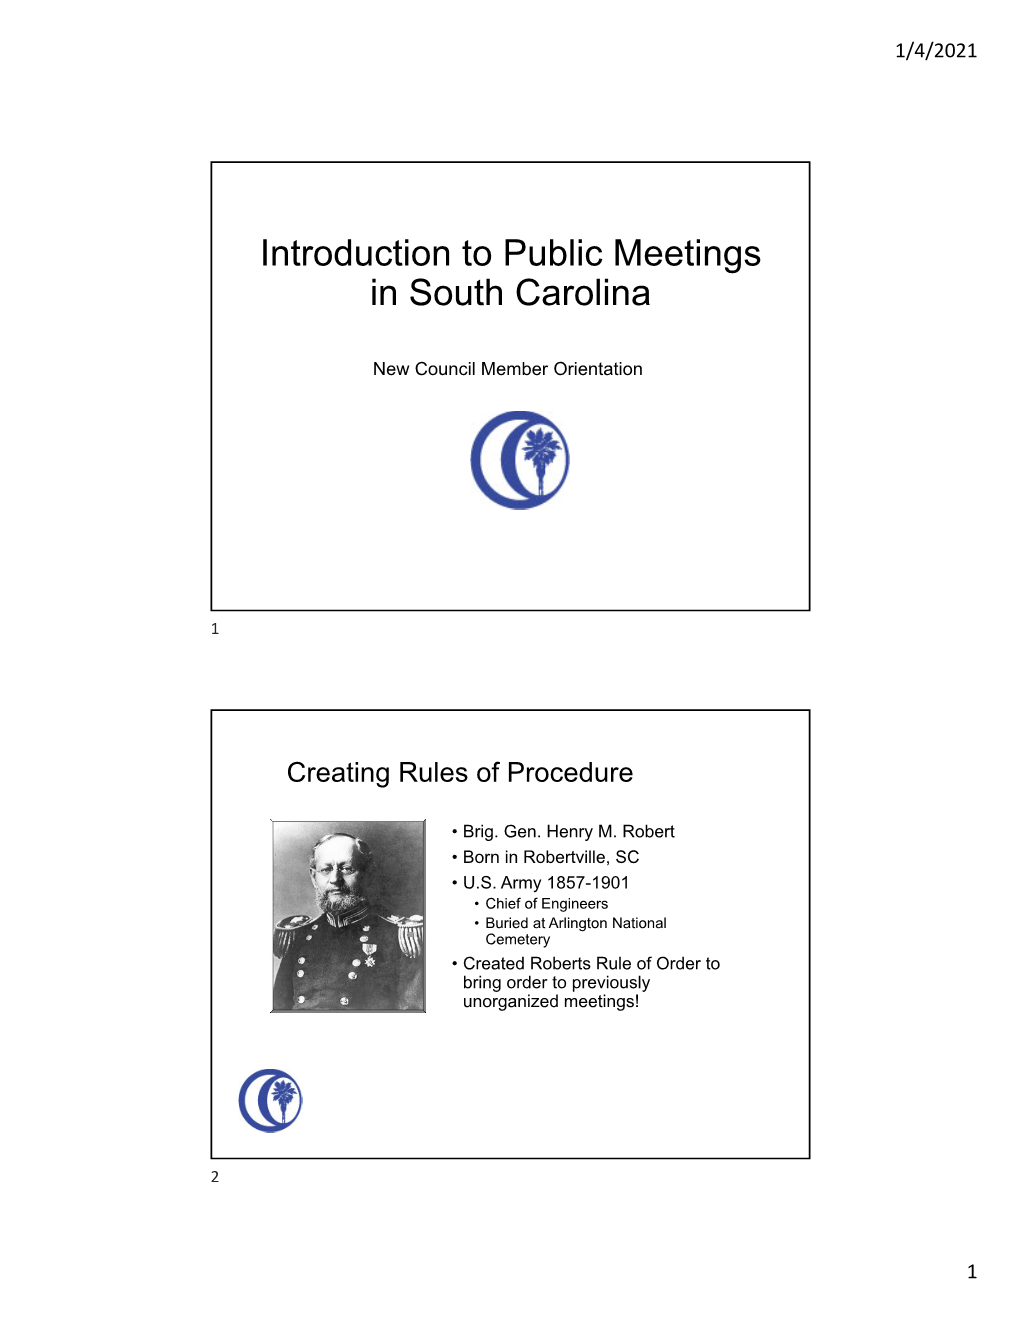 Introduction to Public Meetings in South Carolina